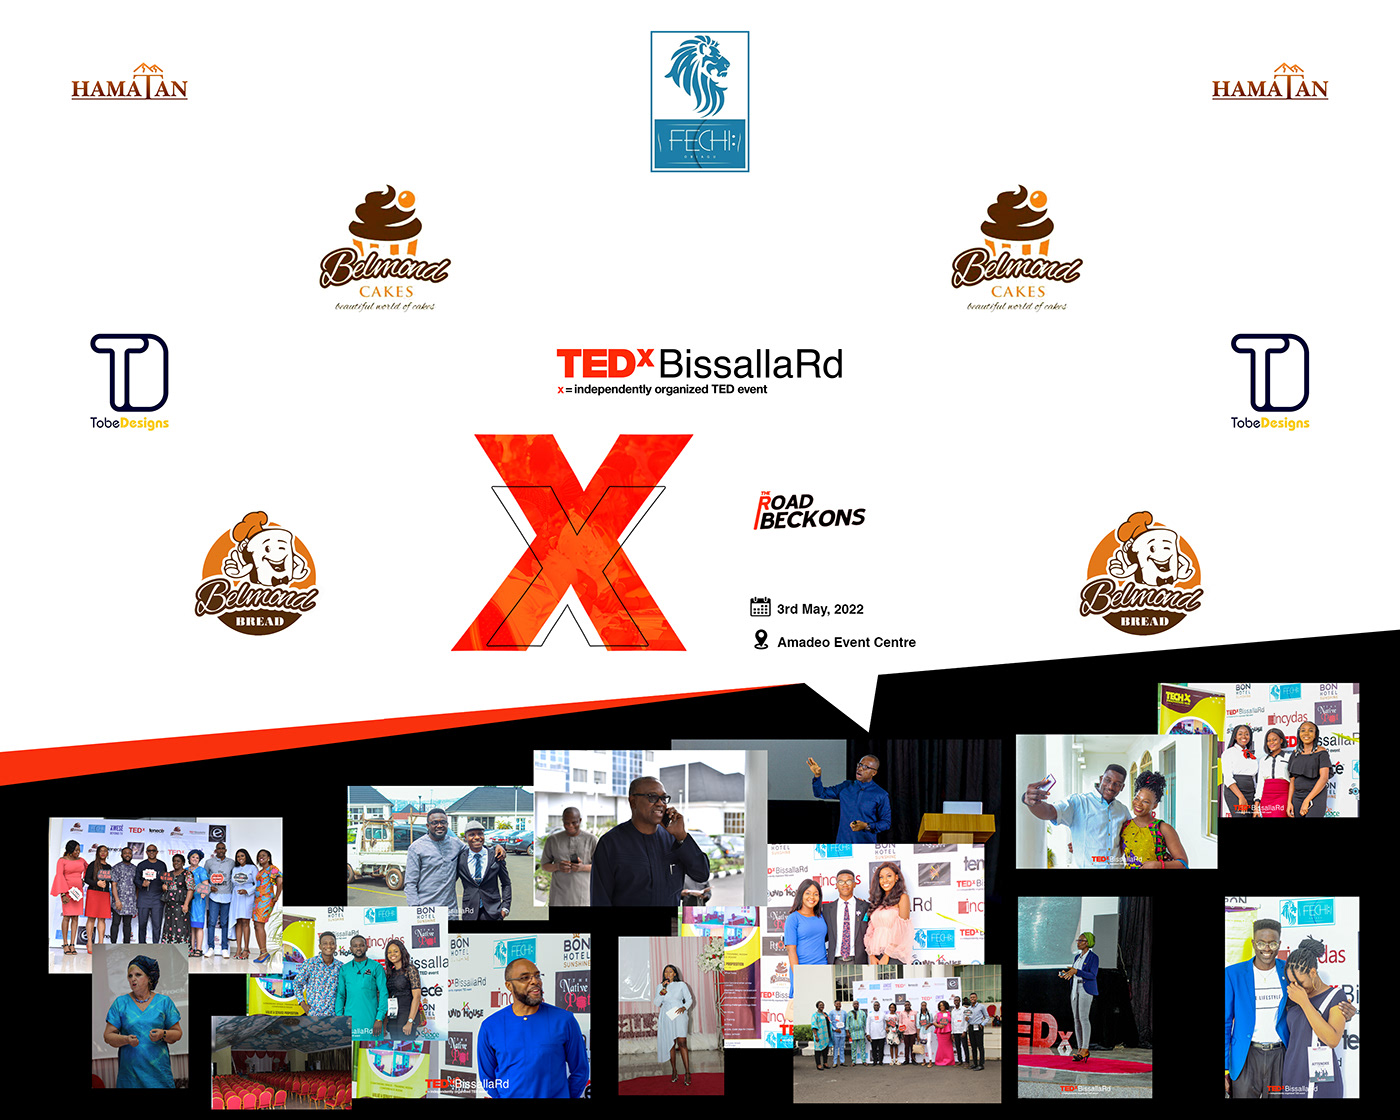 Event Branding TED ted event TED Speaker TED Talk TEDx TEDx Event Tedx speaker TEDx Talk TEDXBISSALLARD